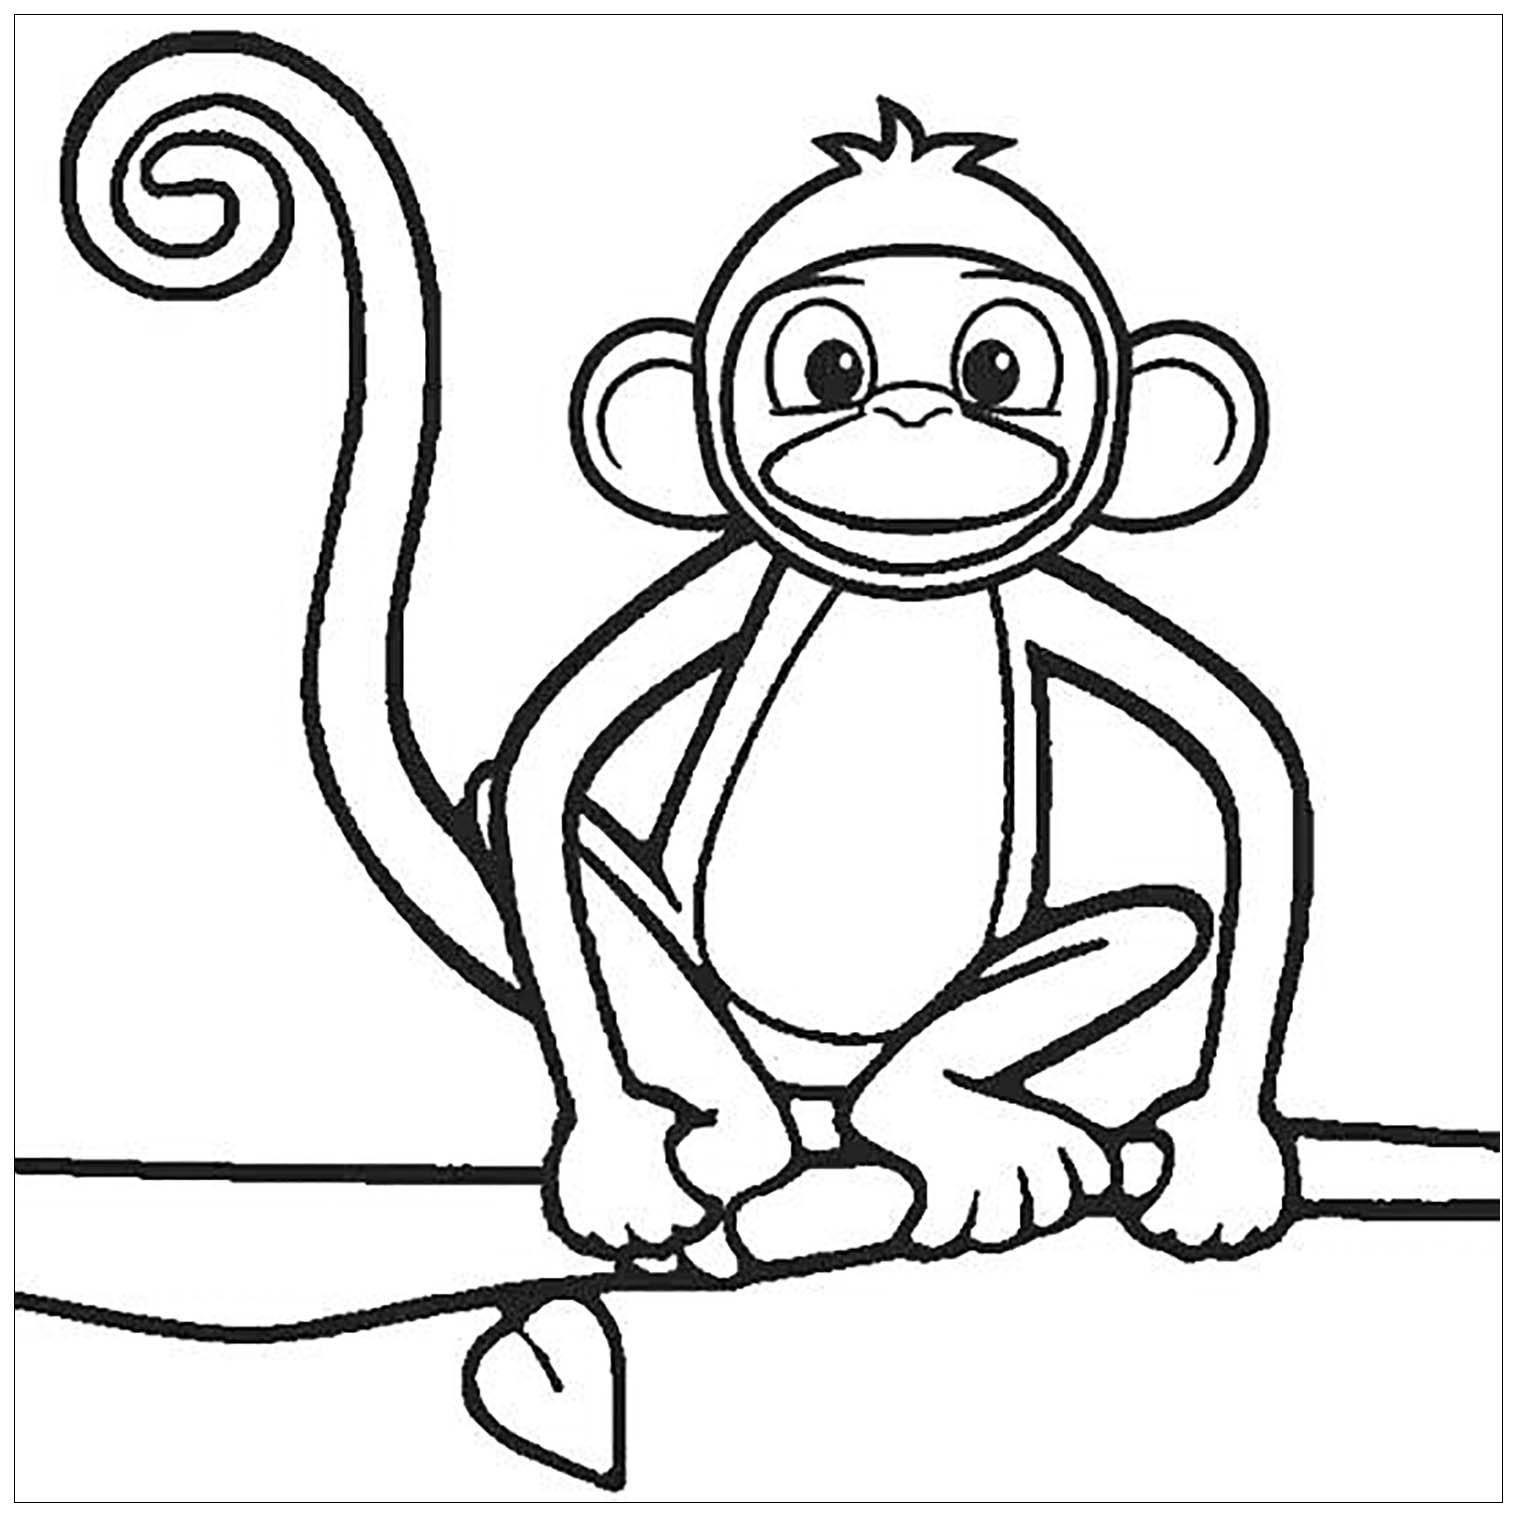 How to Draw Cartoon Monkeys with Easy Step by Step Drawing Tutorial for Kids  | How to Draw Step by Step Drawing Tutorials